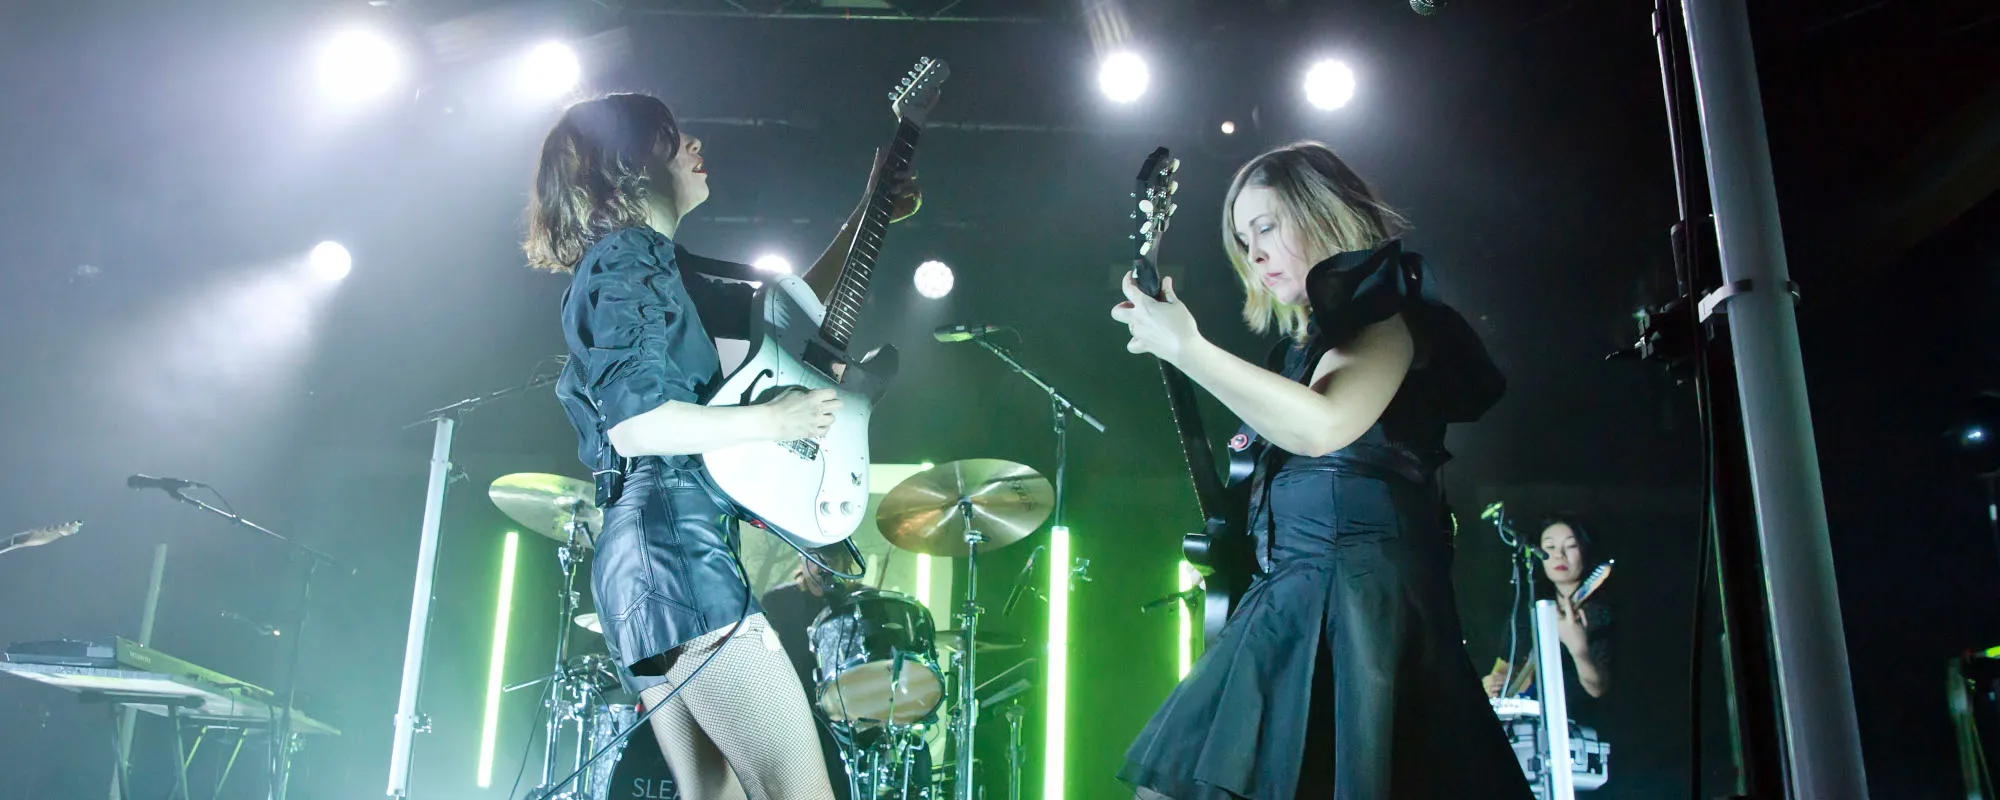 Behind the Territorial Band Name Sleater-Kinney